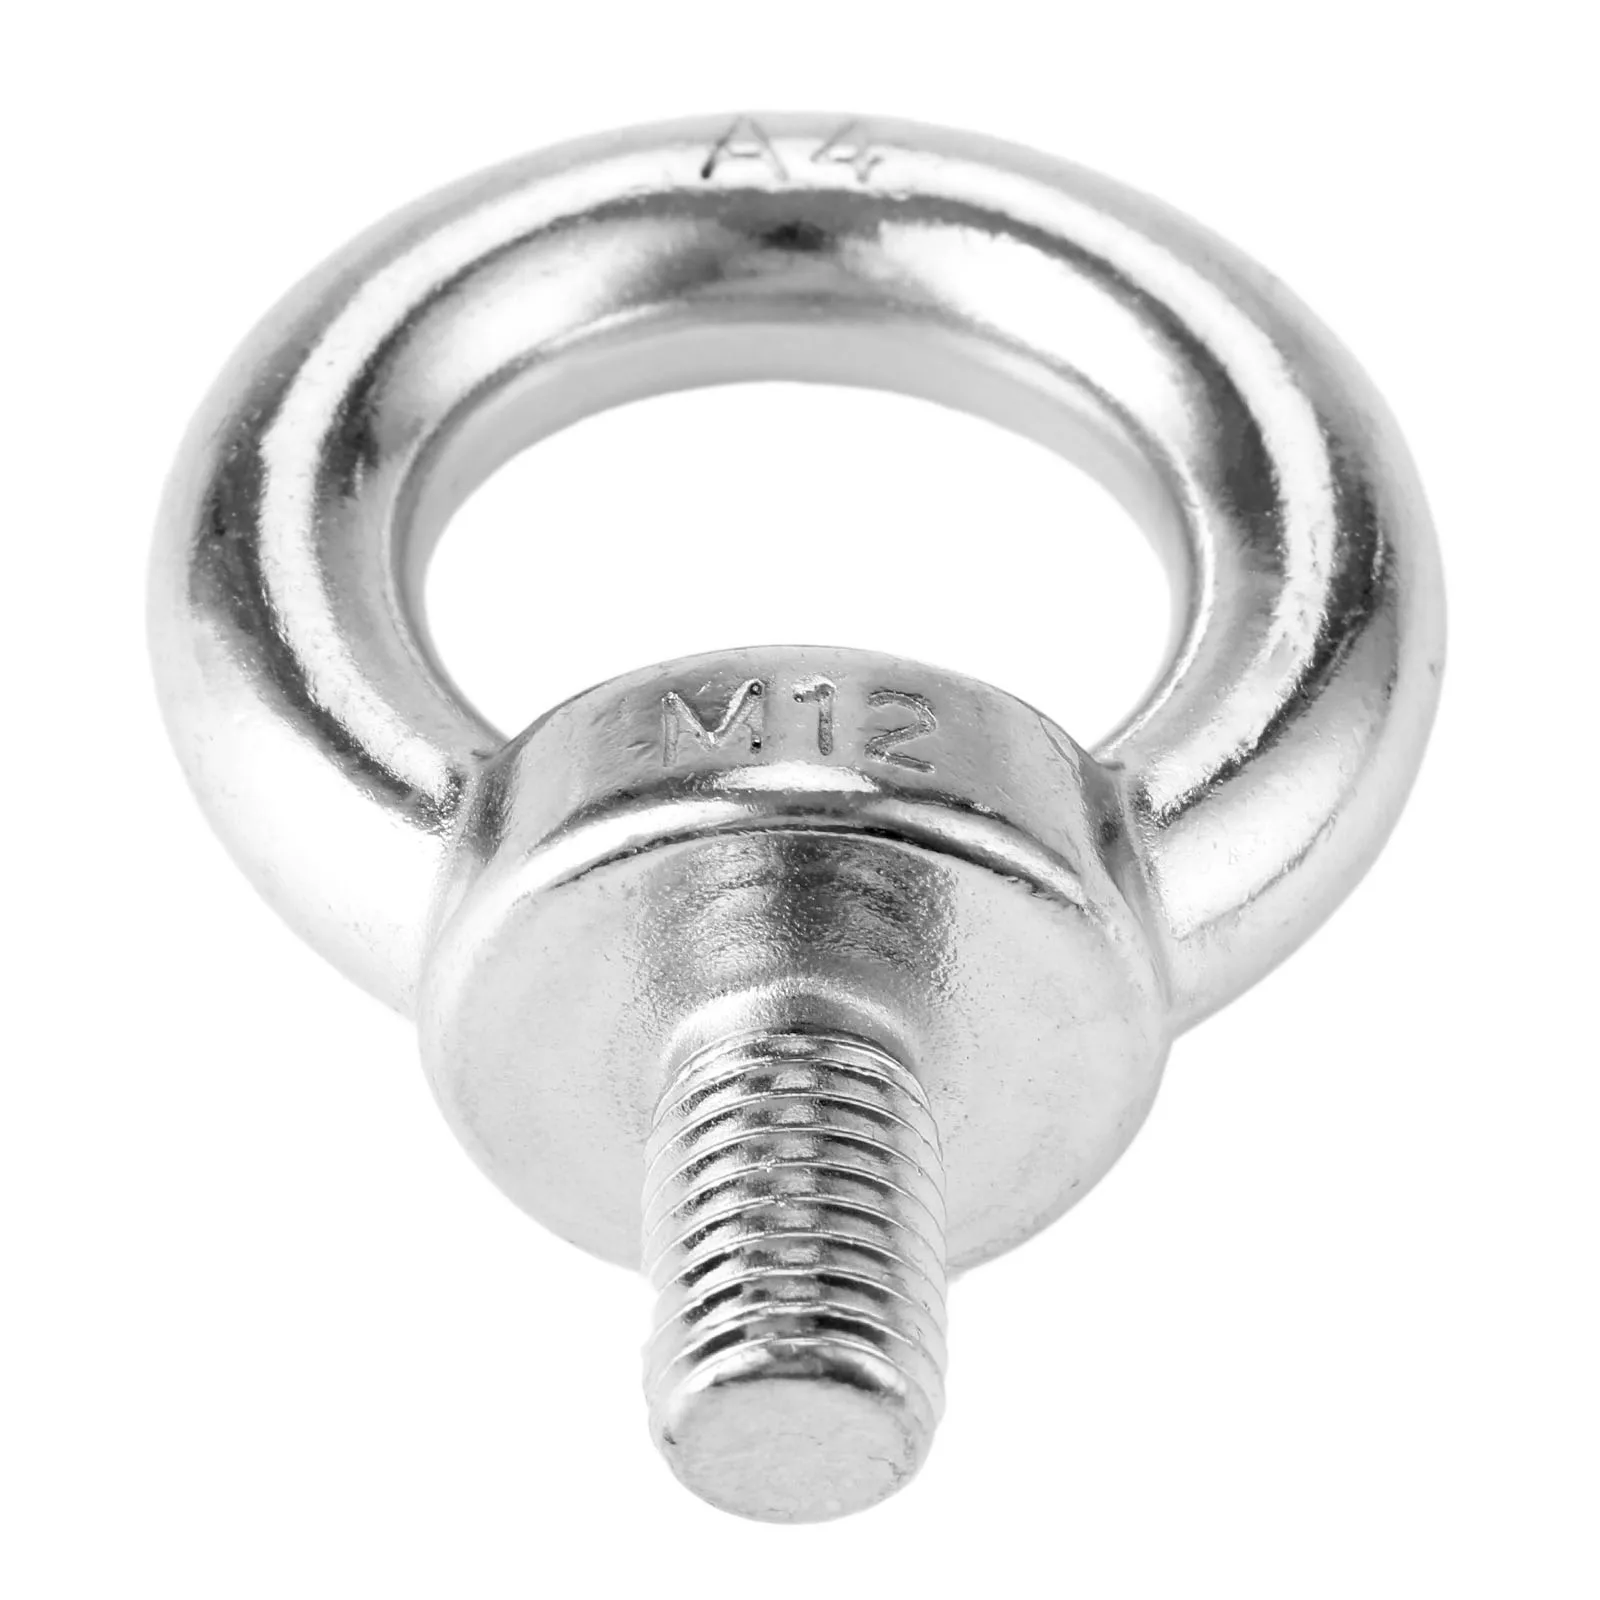 1pc M12 Marine Grade 316 Stainless Steel Eyebolt Lifting Eye Bolts Ring Screw Loop Hole Bolt For Cable Rope Lifting Boat Fitting 12 9 grade external hexagonal flange bolt plum blossom external hexagonal screw m5m6